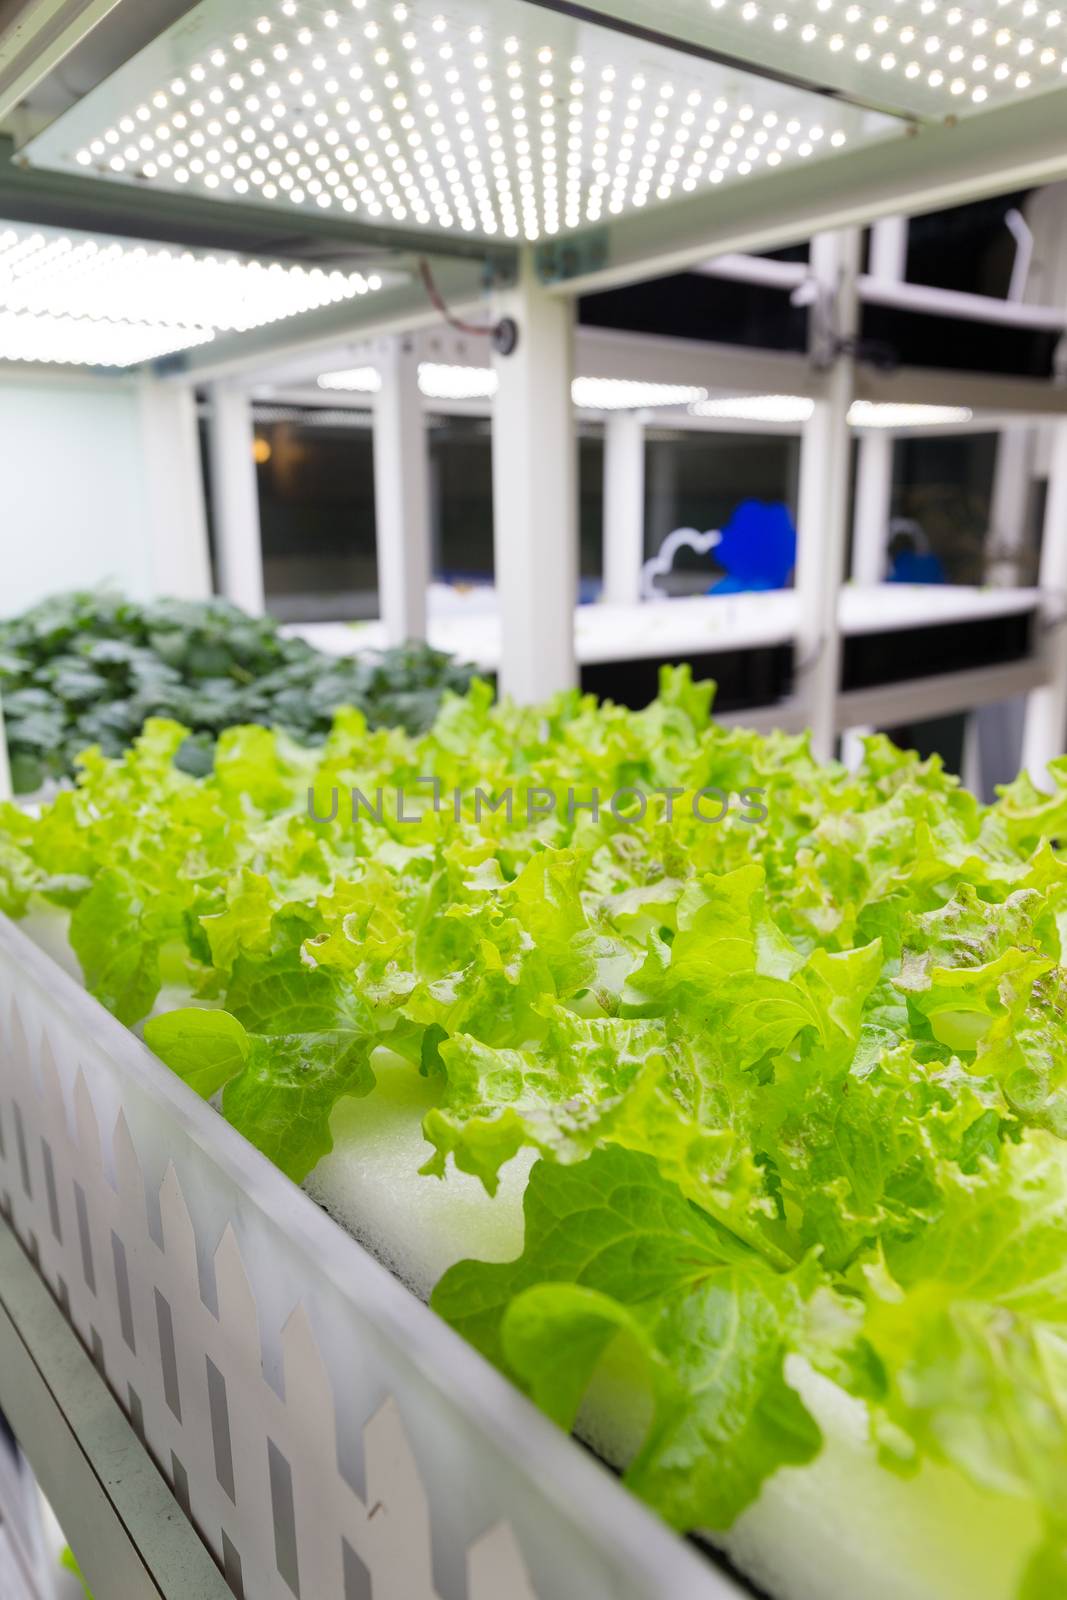 Organic hydroponic vegetable indoor by leungchopan